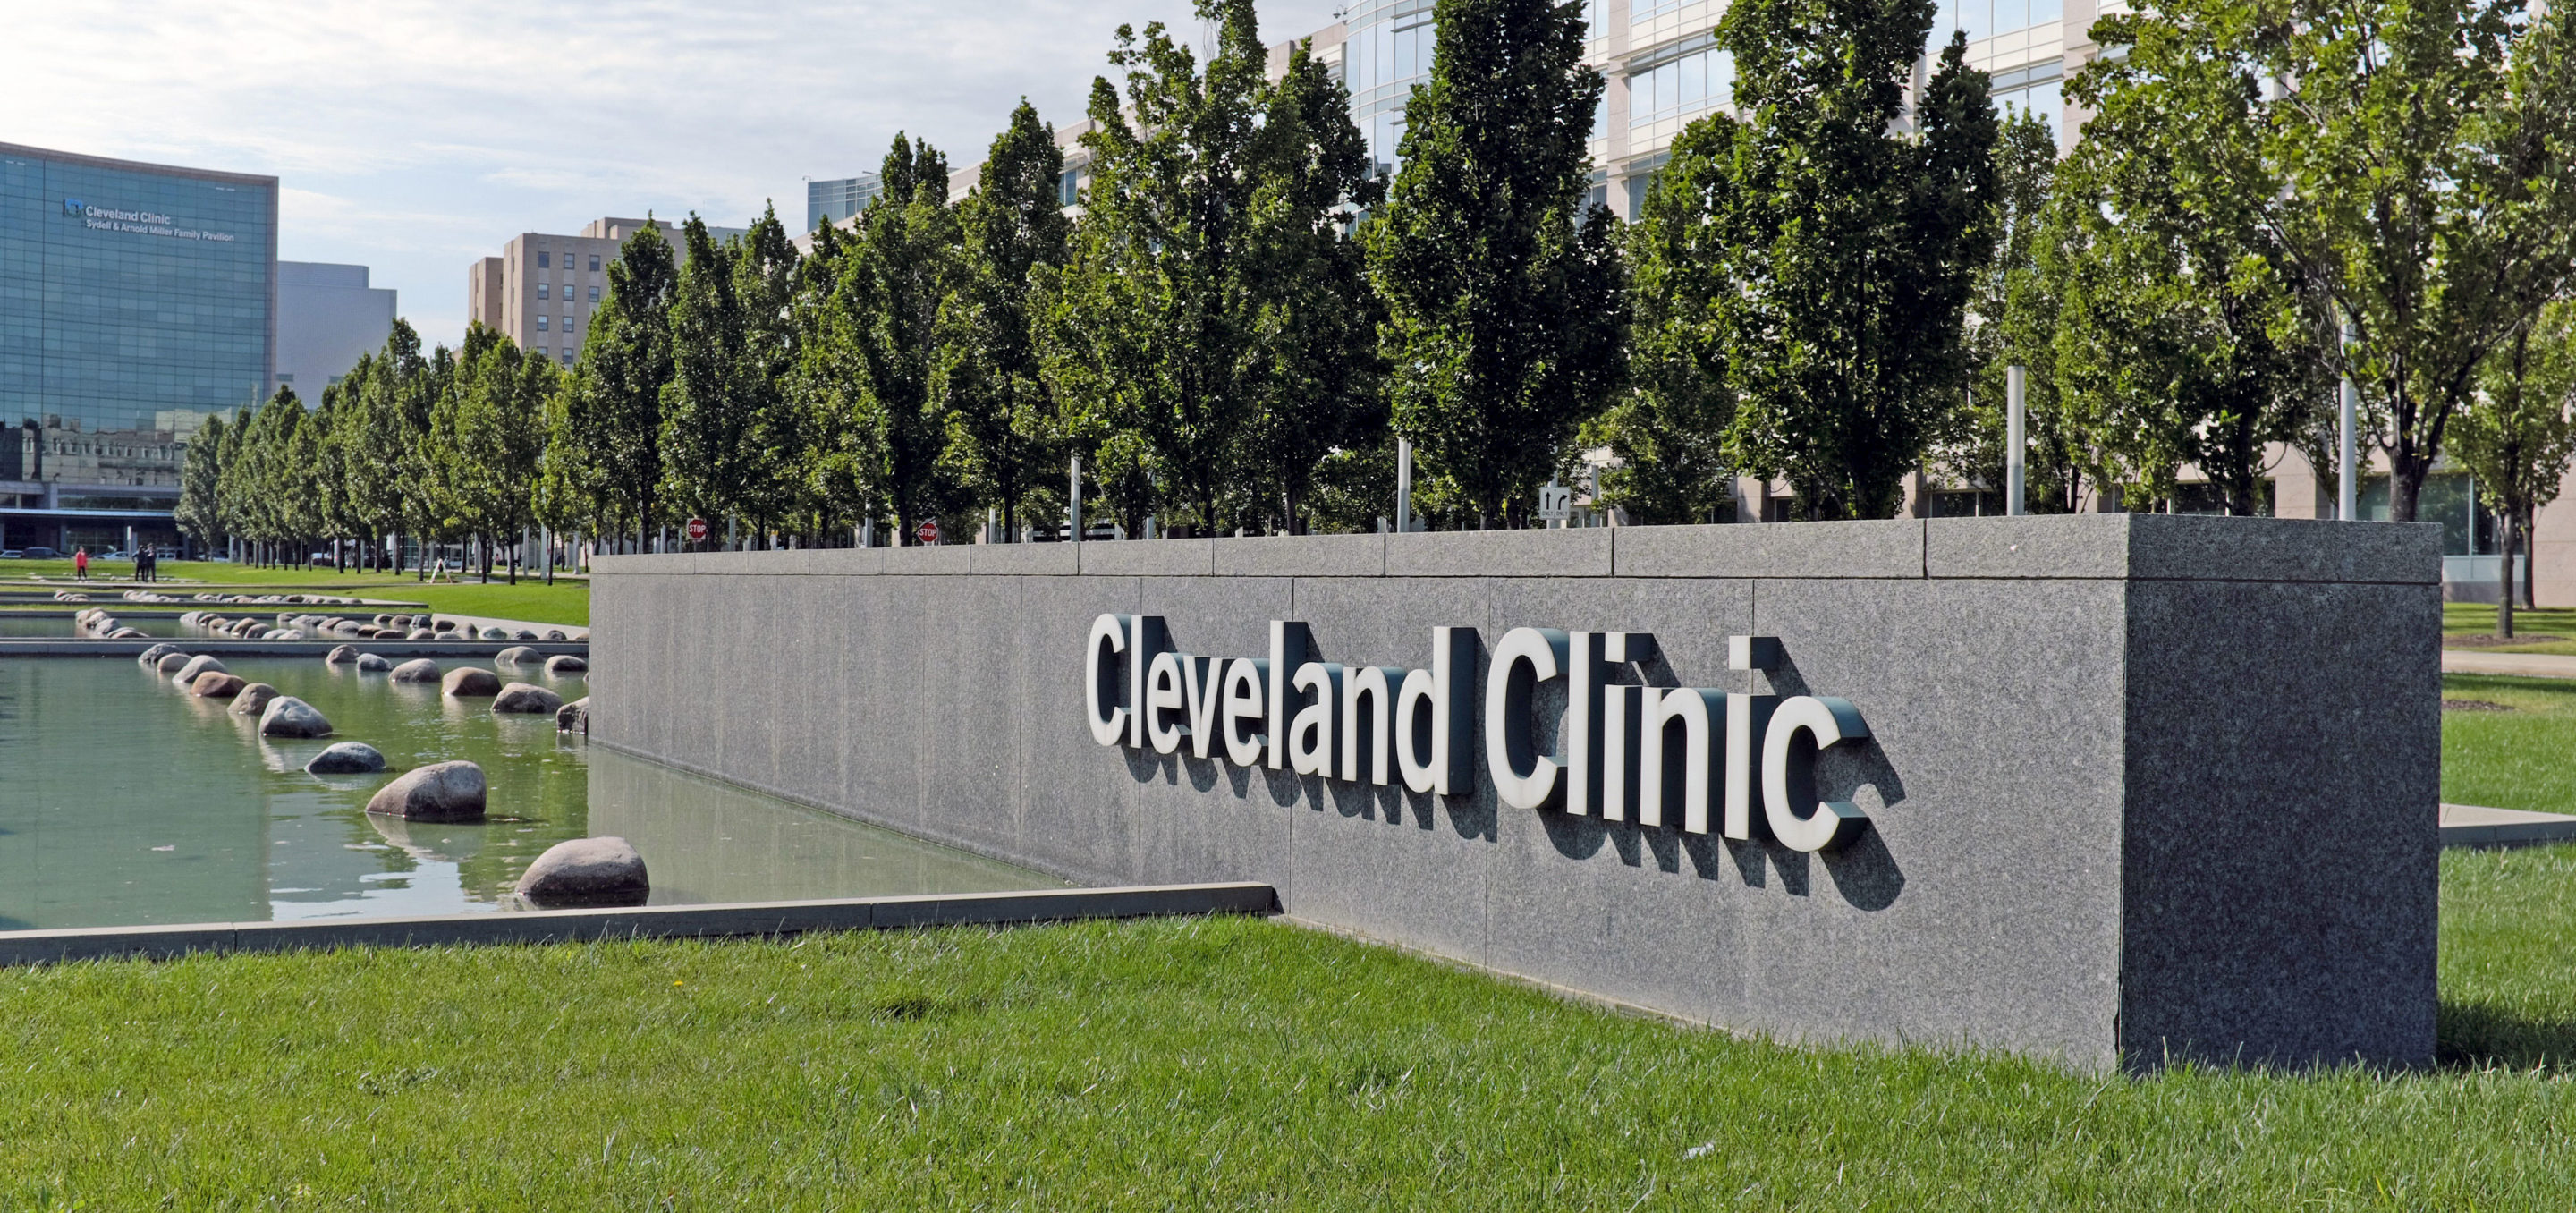 Cleveland Clinic makes deal with Sisters of Charity to 